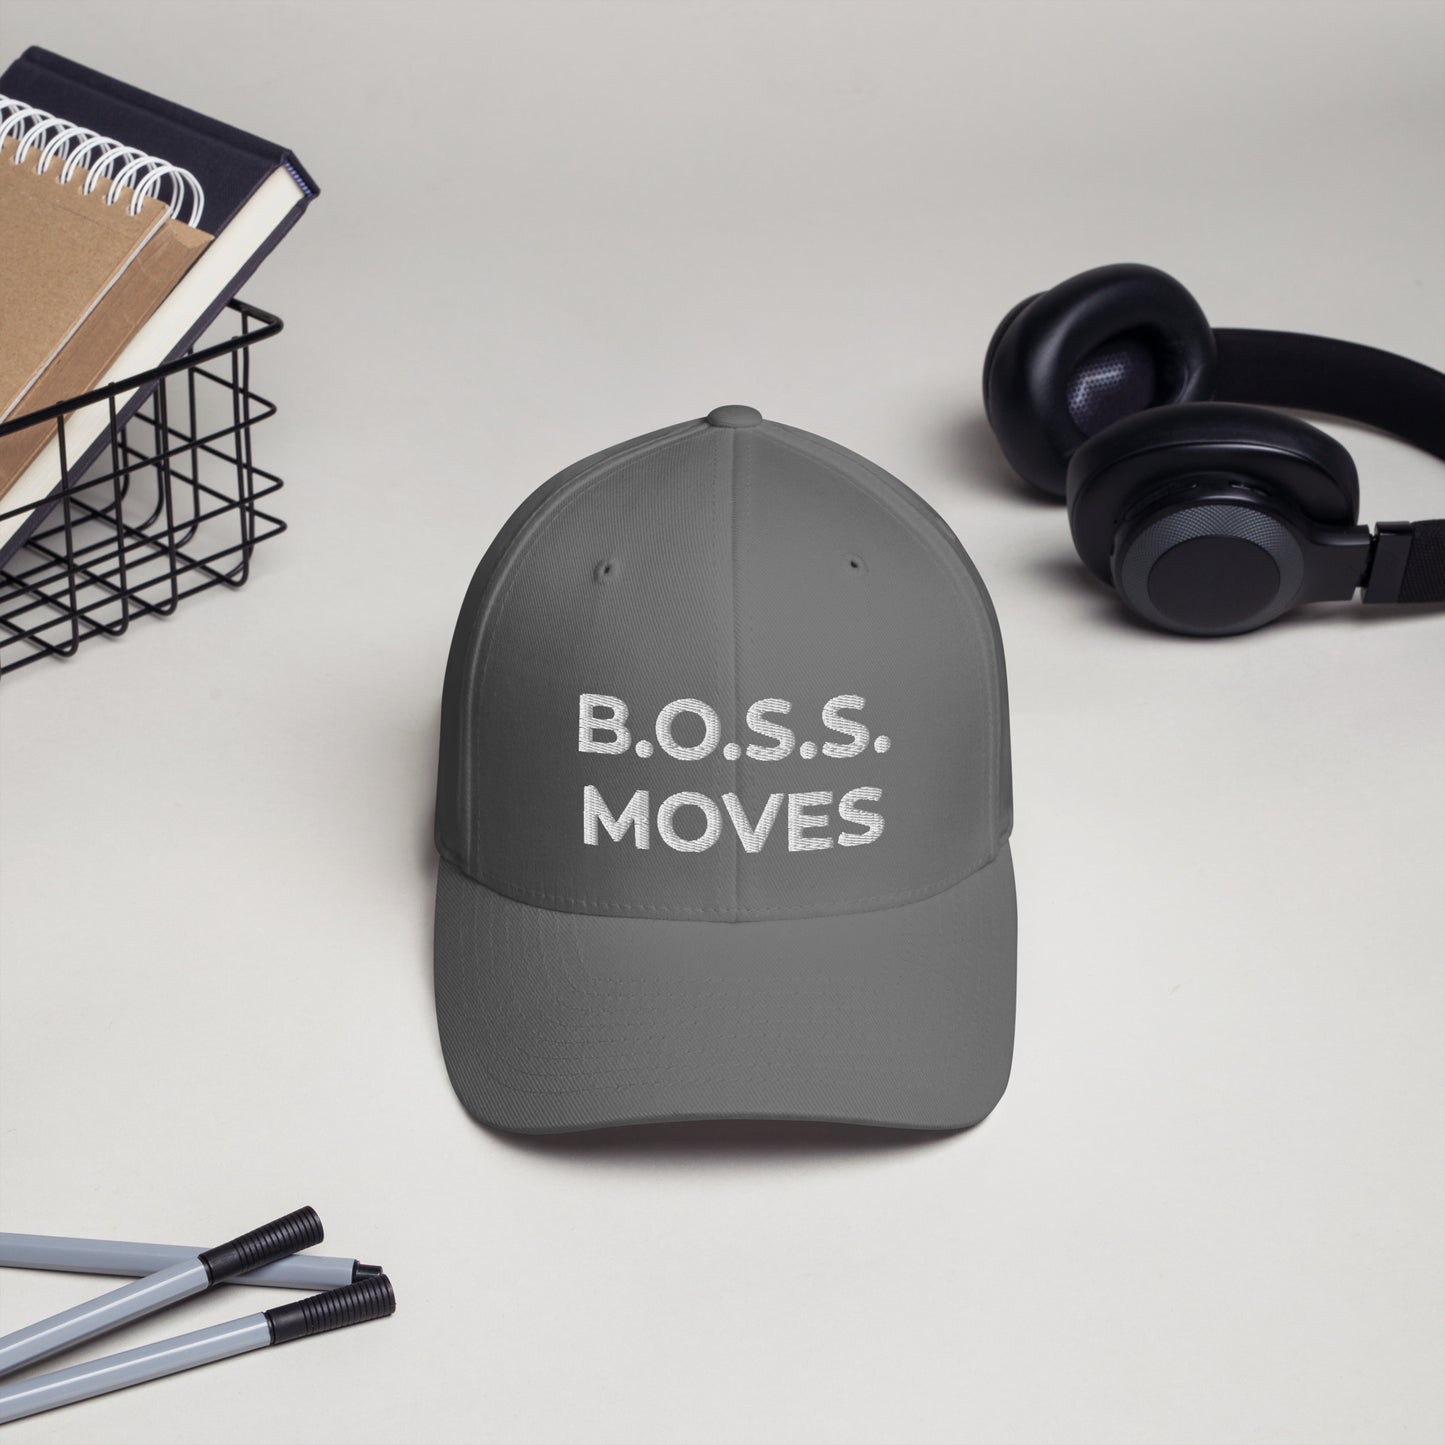 B.O.S.S. MOVES by Myron Golden